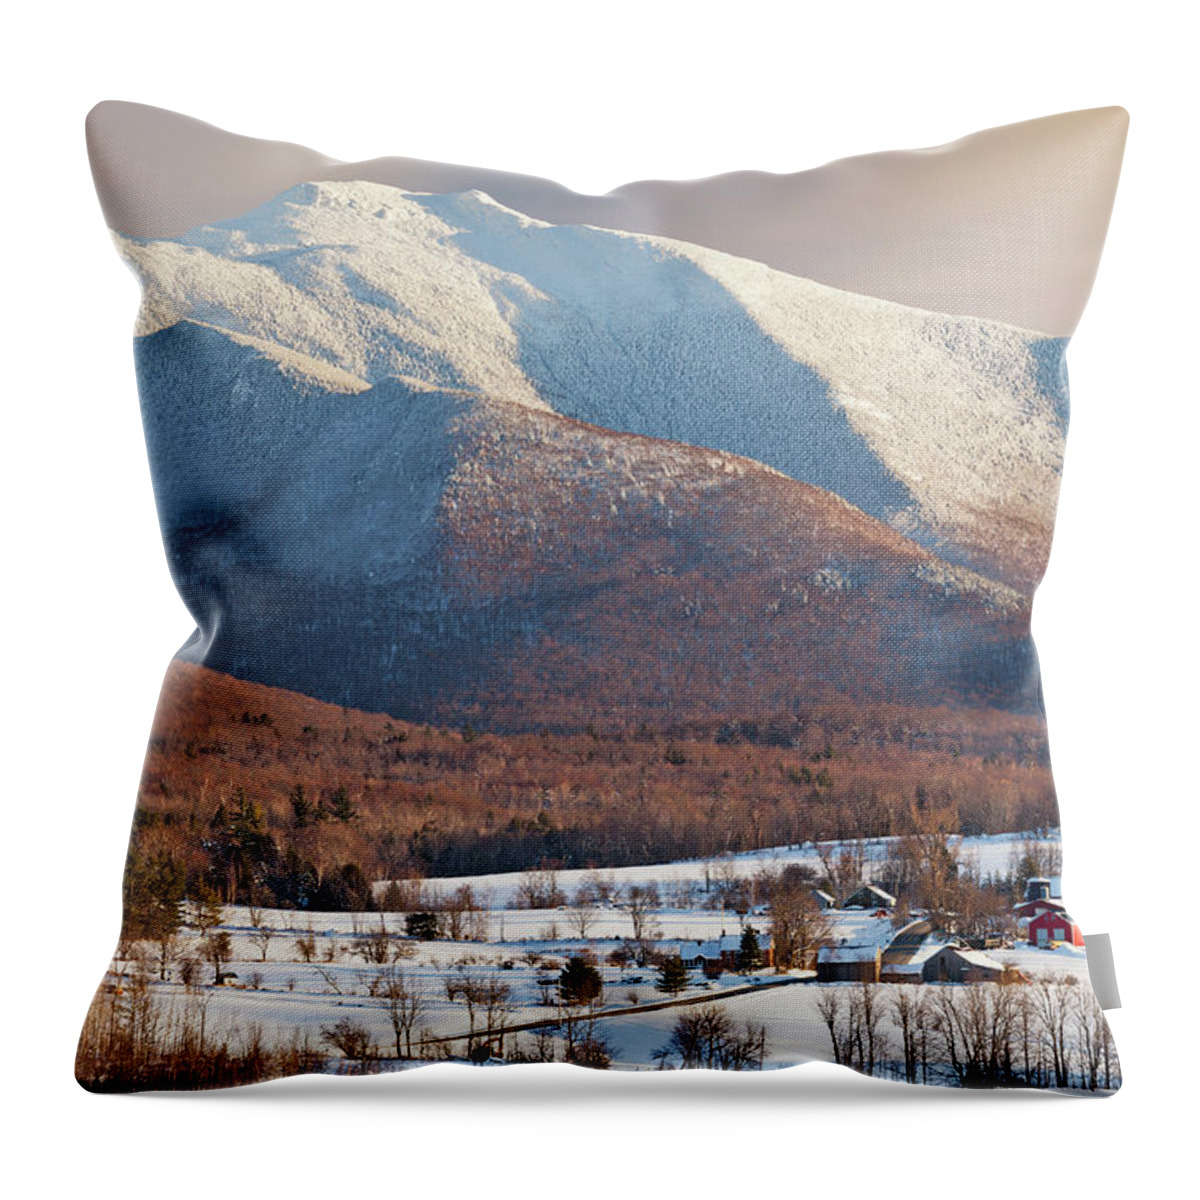 Wintertime Throw Pillow featuring the photograph Mount Mansfield Winter Afternoon by Alan L Graham